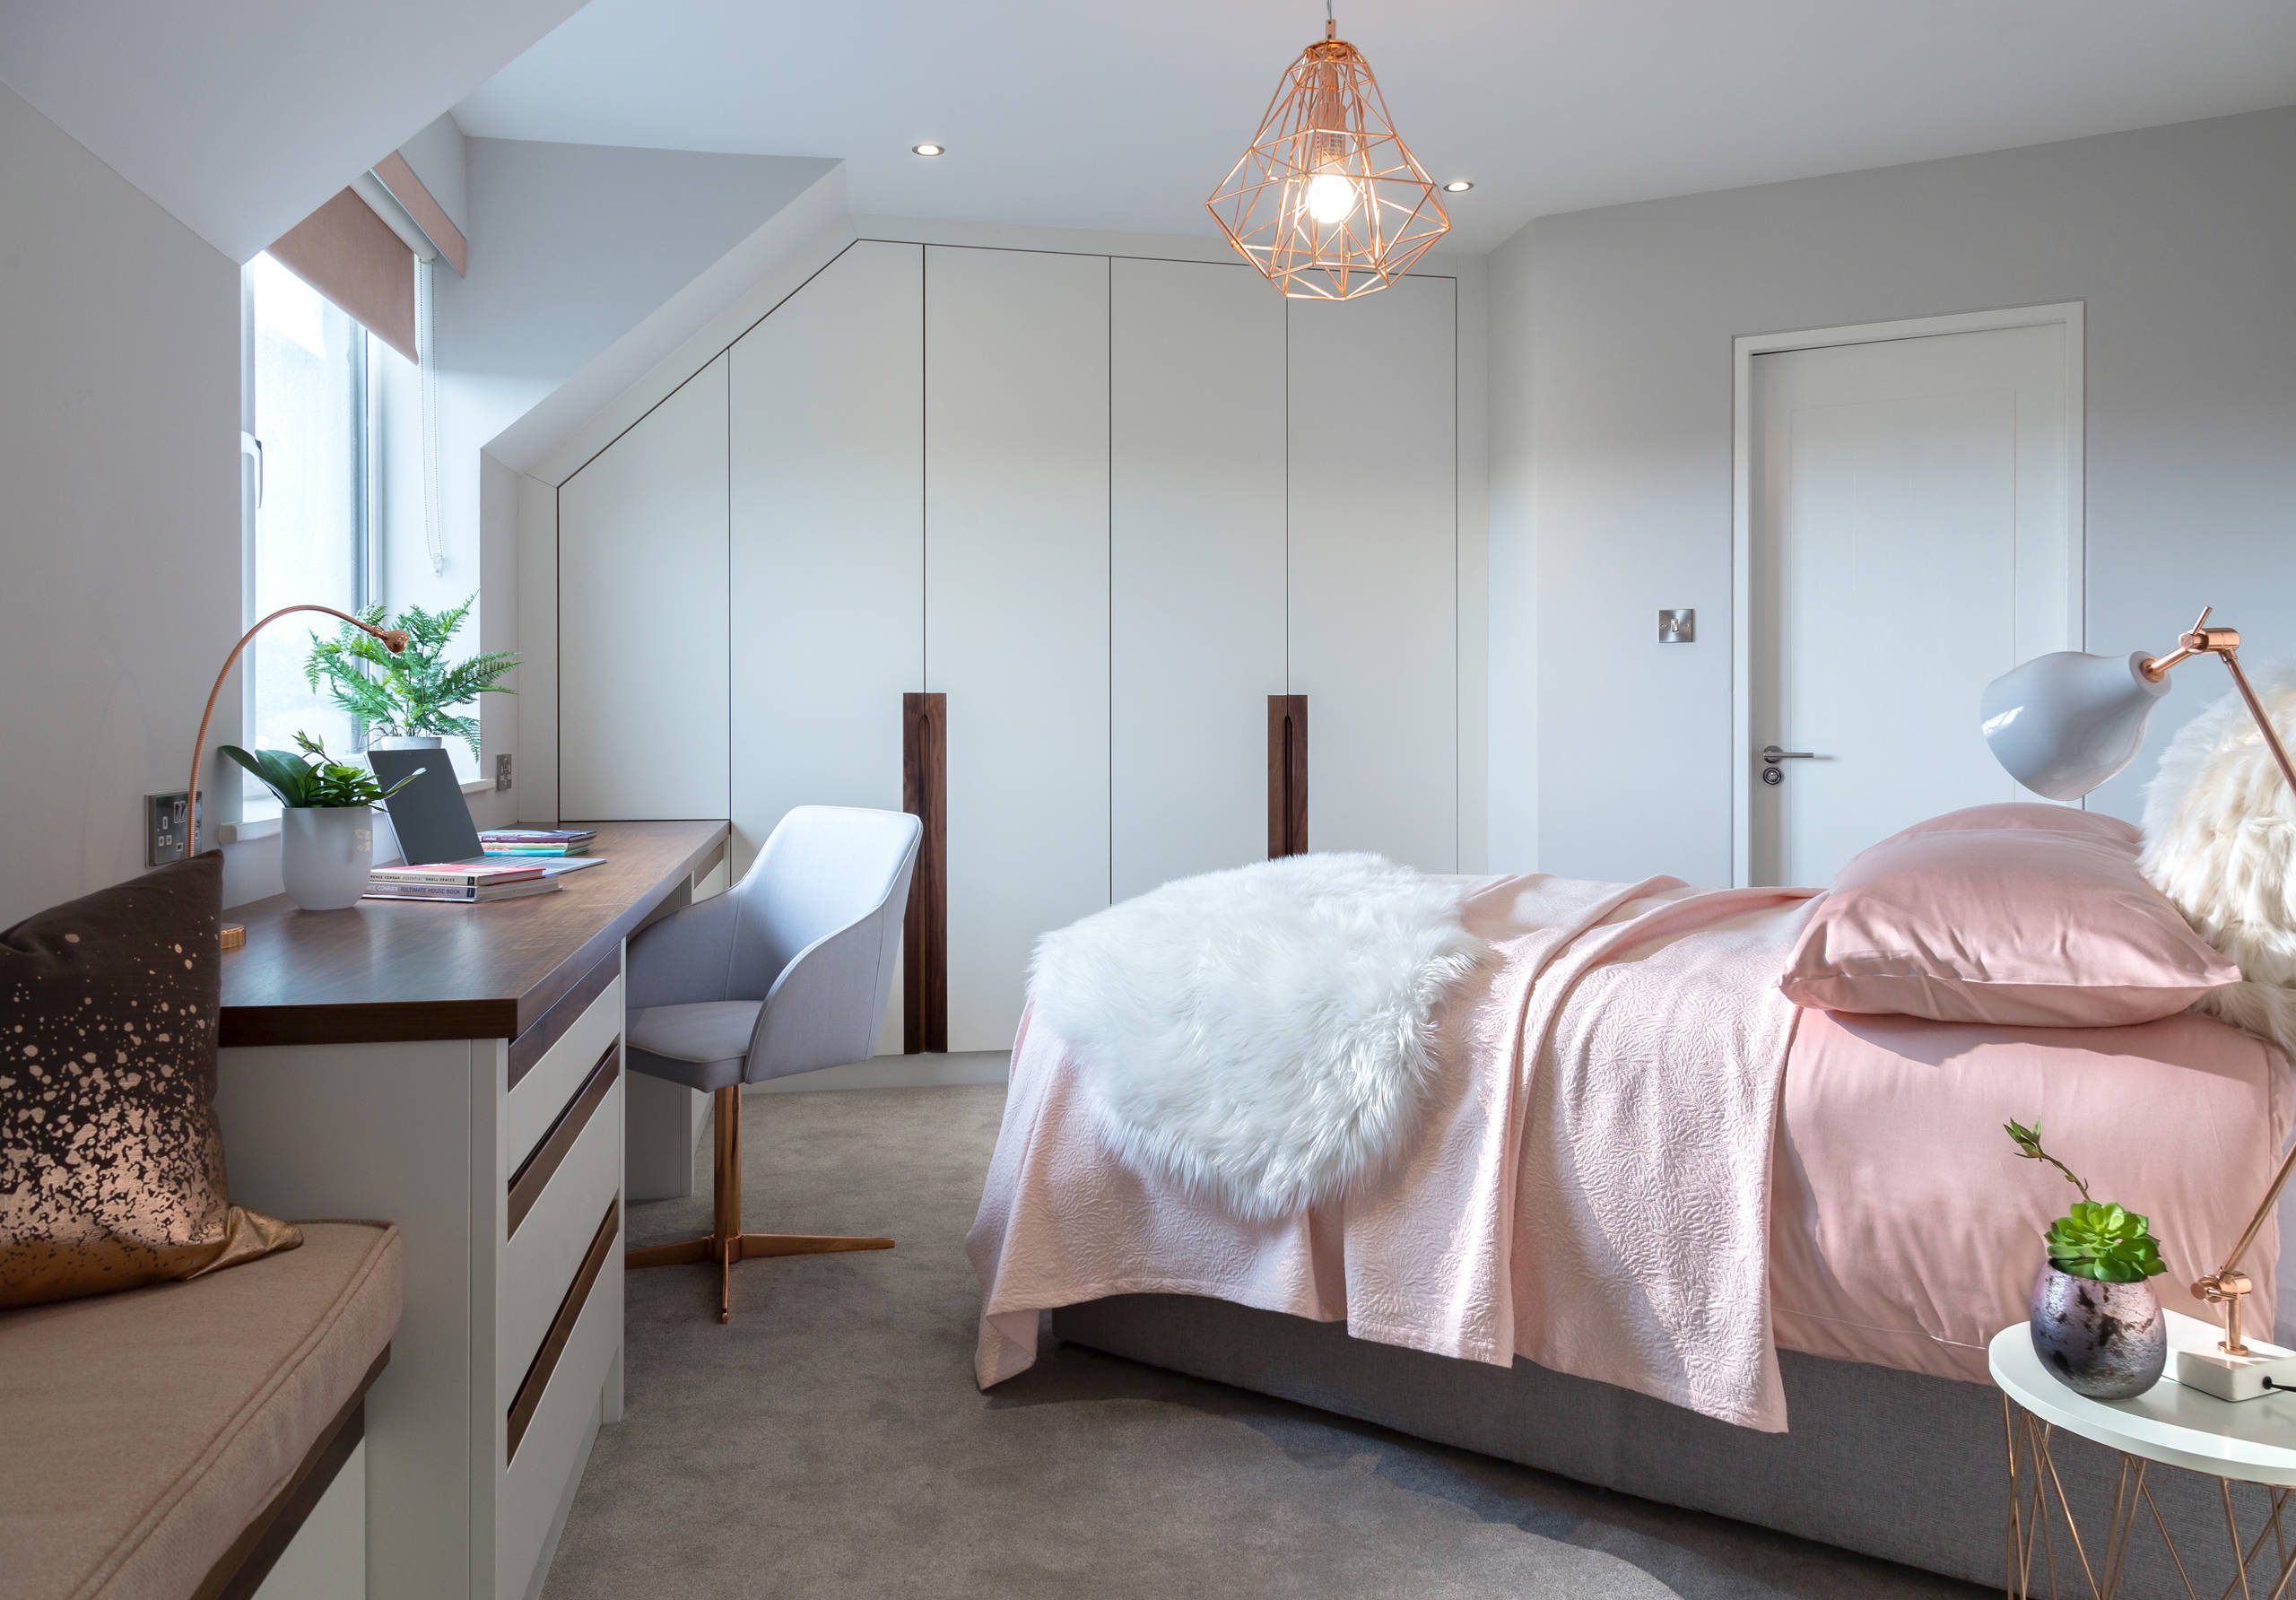 Rose Gold Bedroom Ideas And Photos Houzz